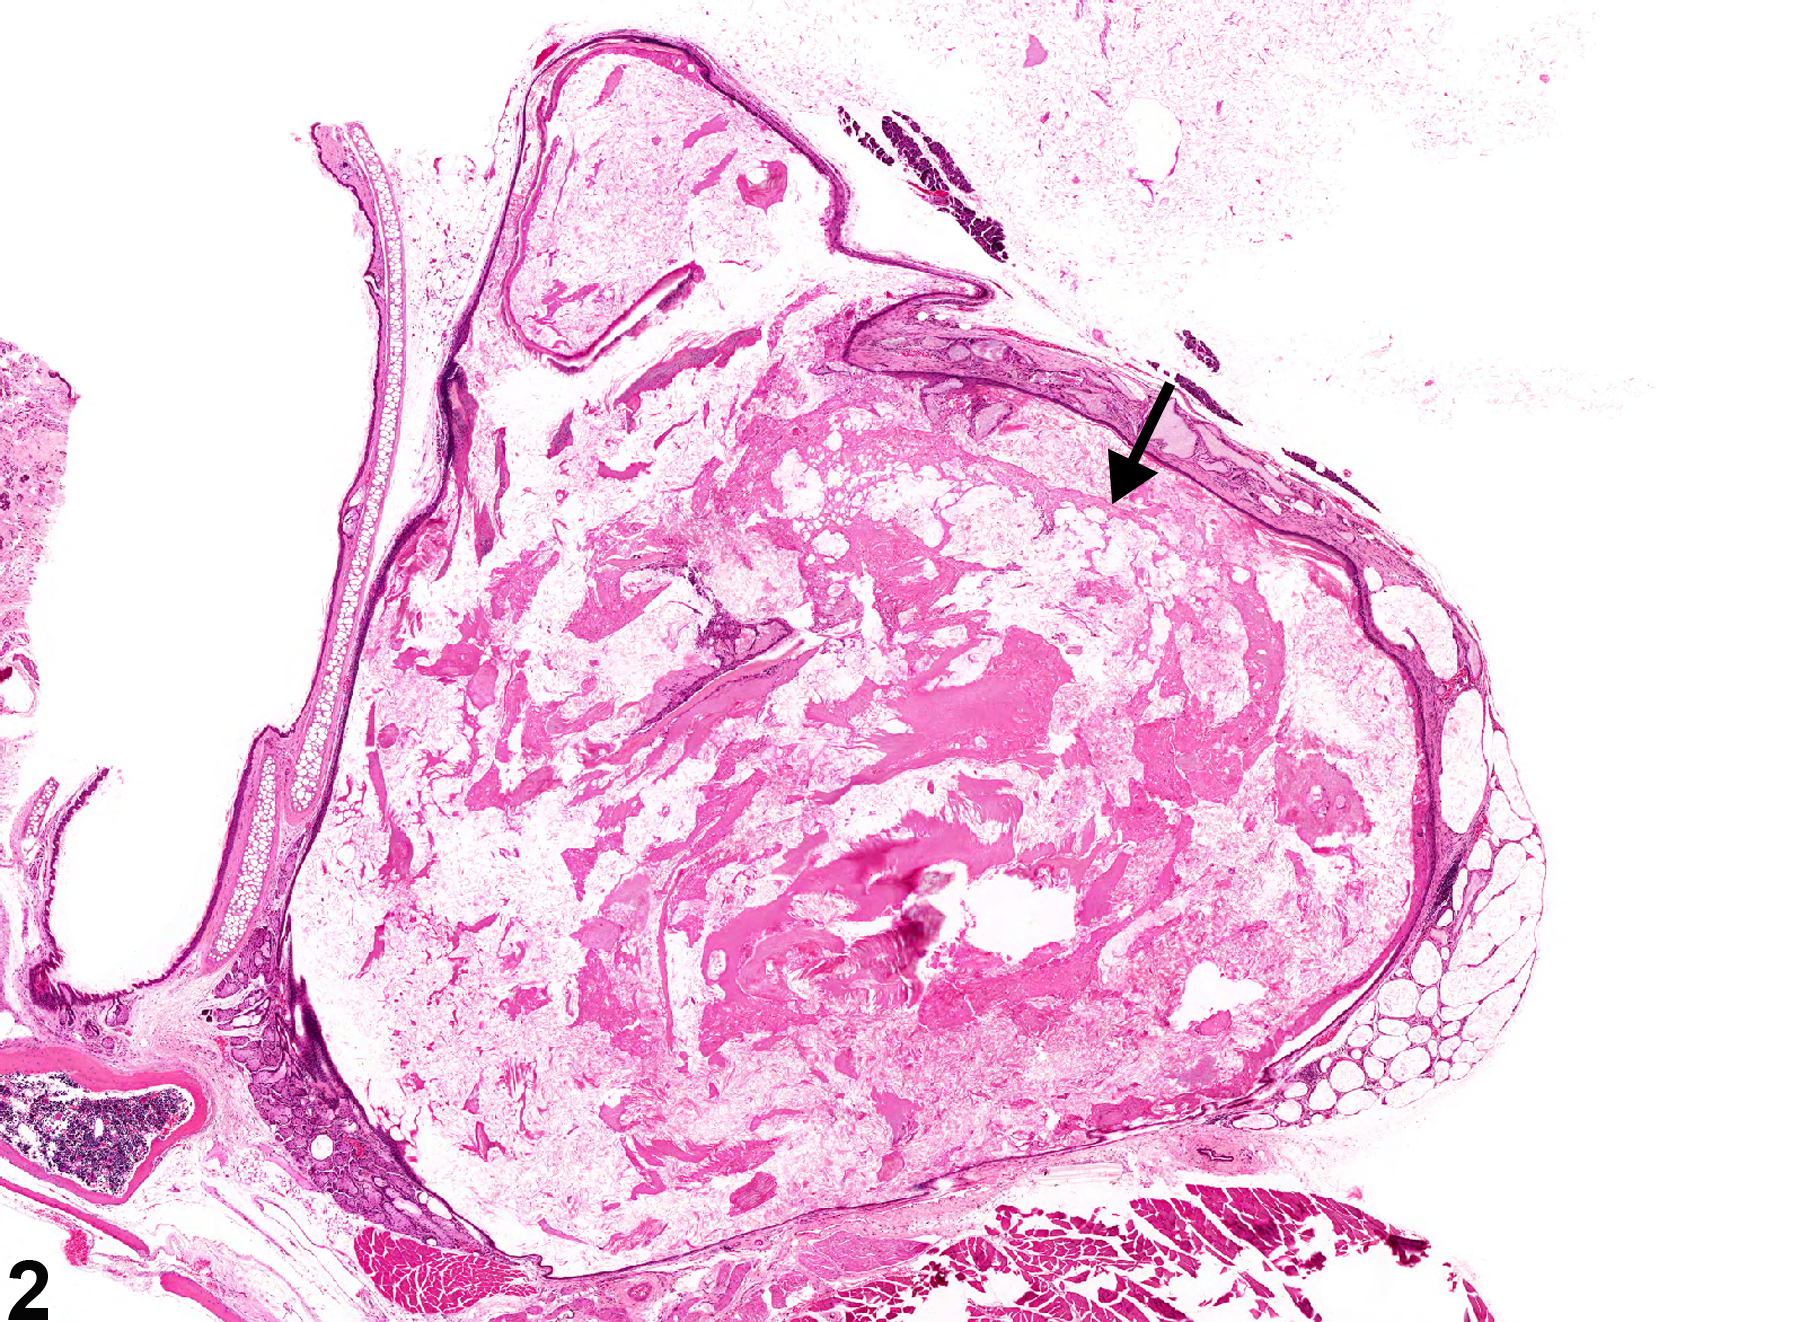 Image of canal dilation in the ear from a male B6C3F1 mouse in a chronic study